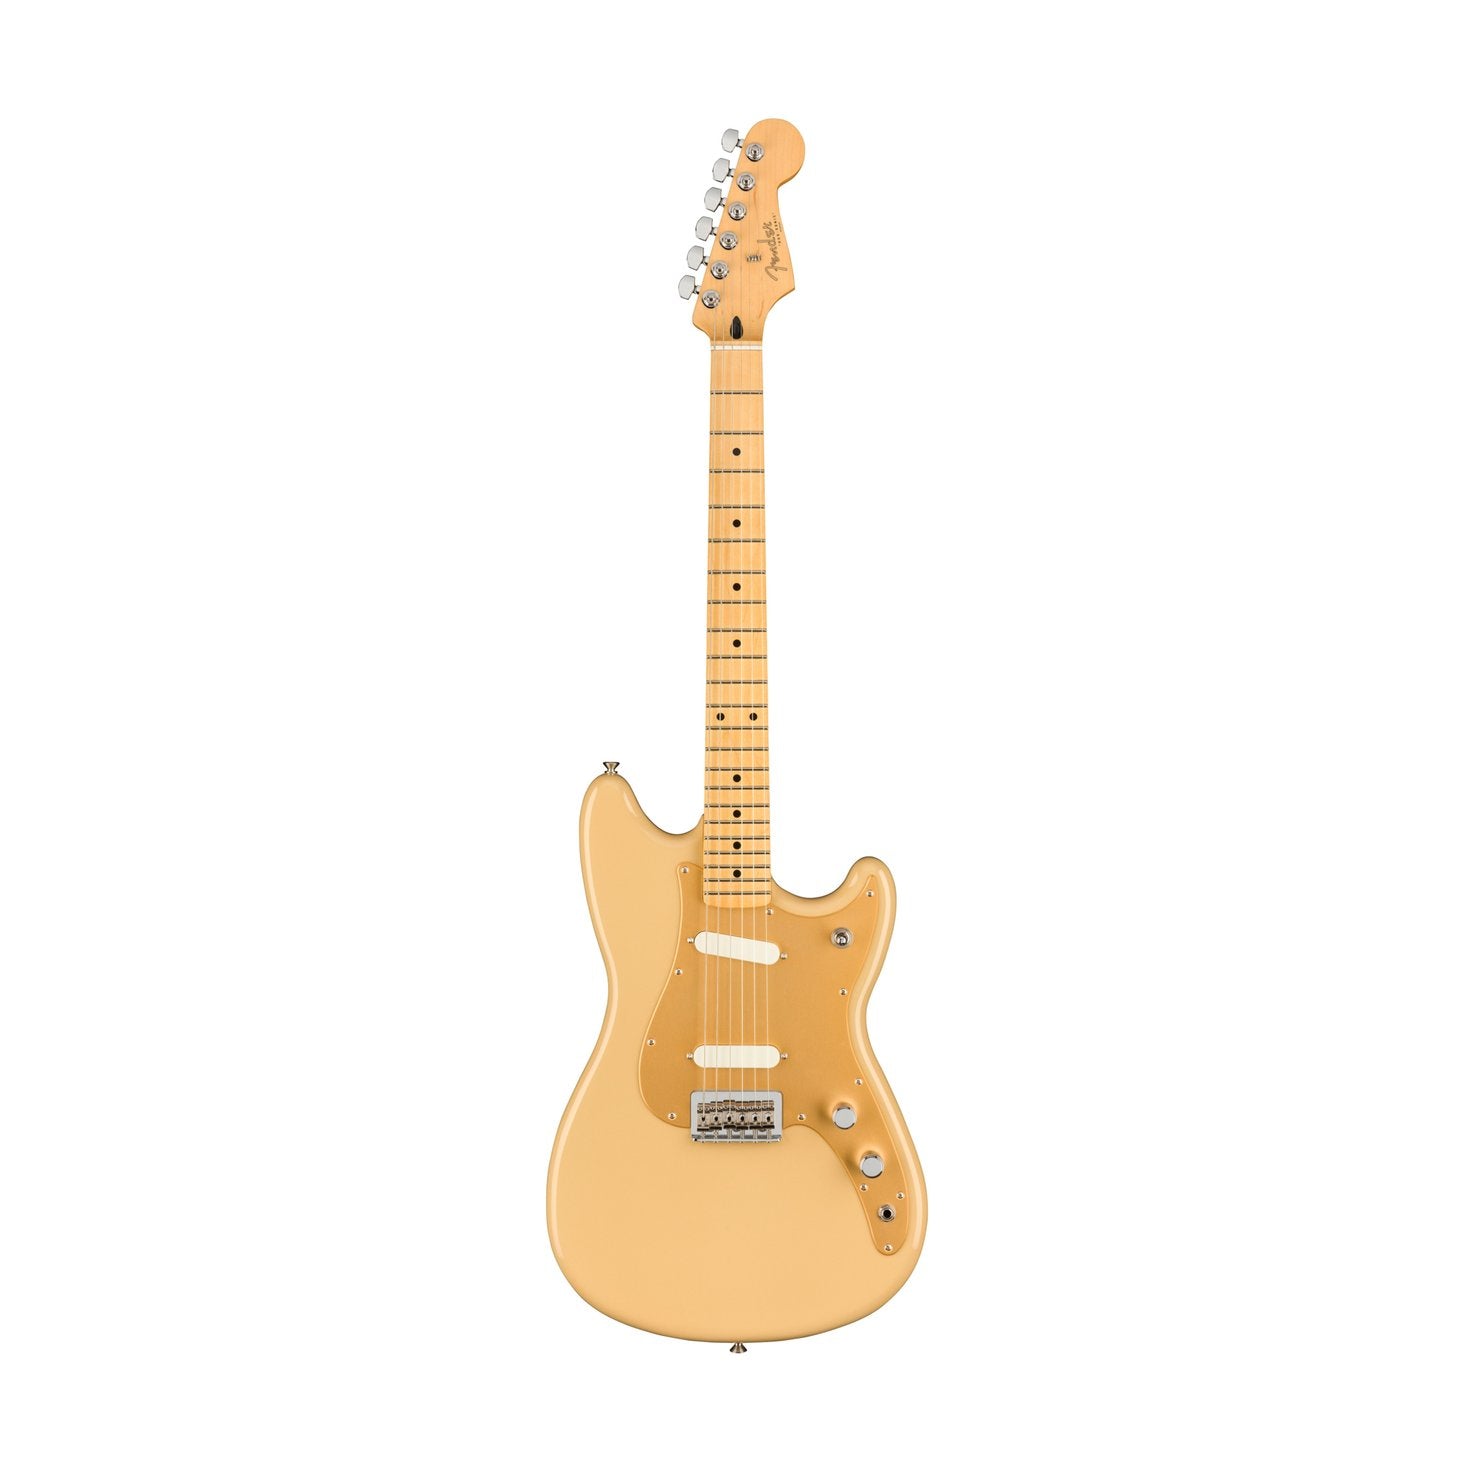 Fender Player Duo-Sonic Electric Guitar, Maple FB, Desert Sand, FENDER, ELECTRIC GUITAR, fender-eletric-guitar-f03-014-4012-589, ZOSO MUSIC SDN BHD